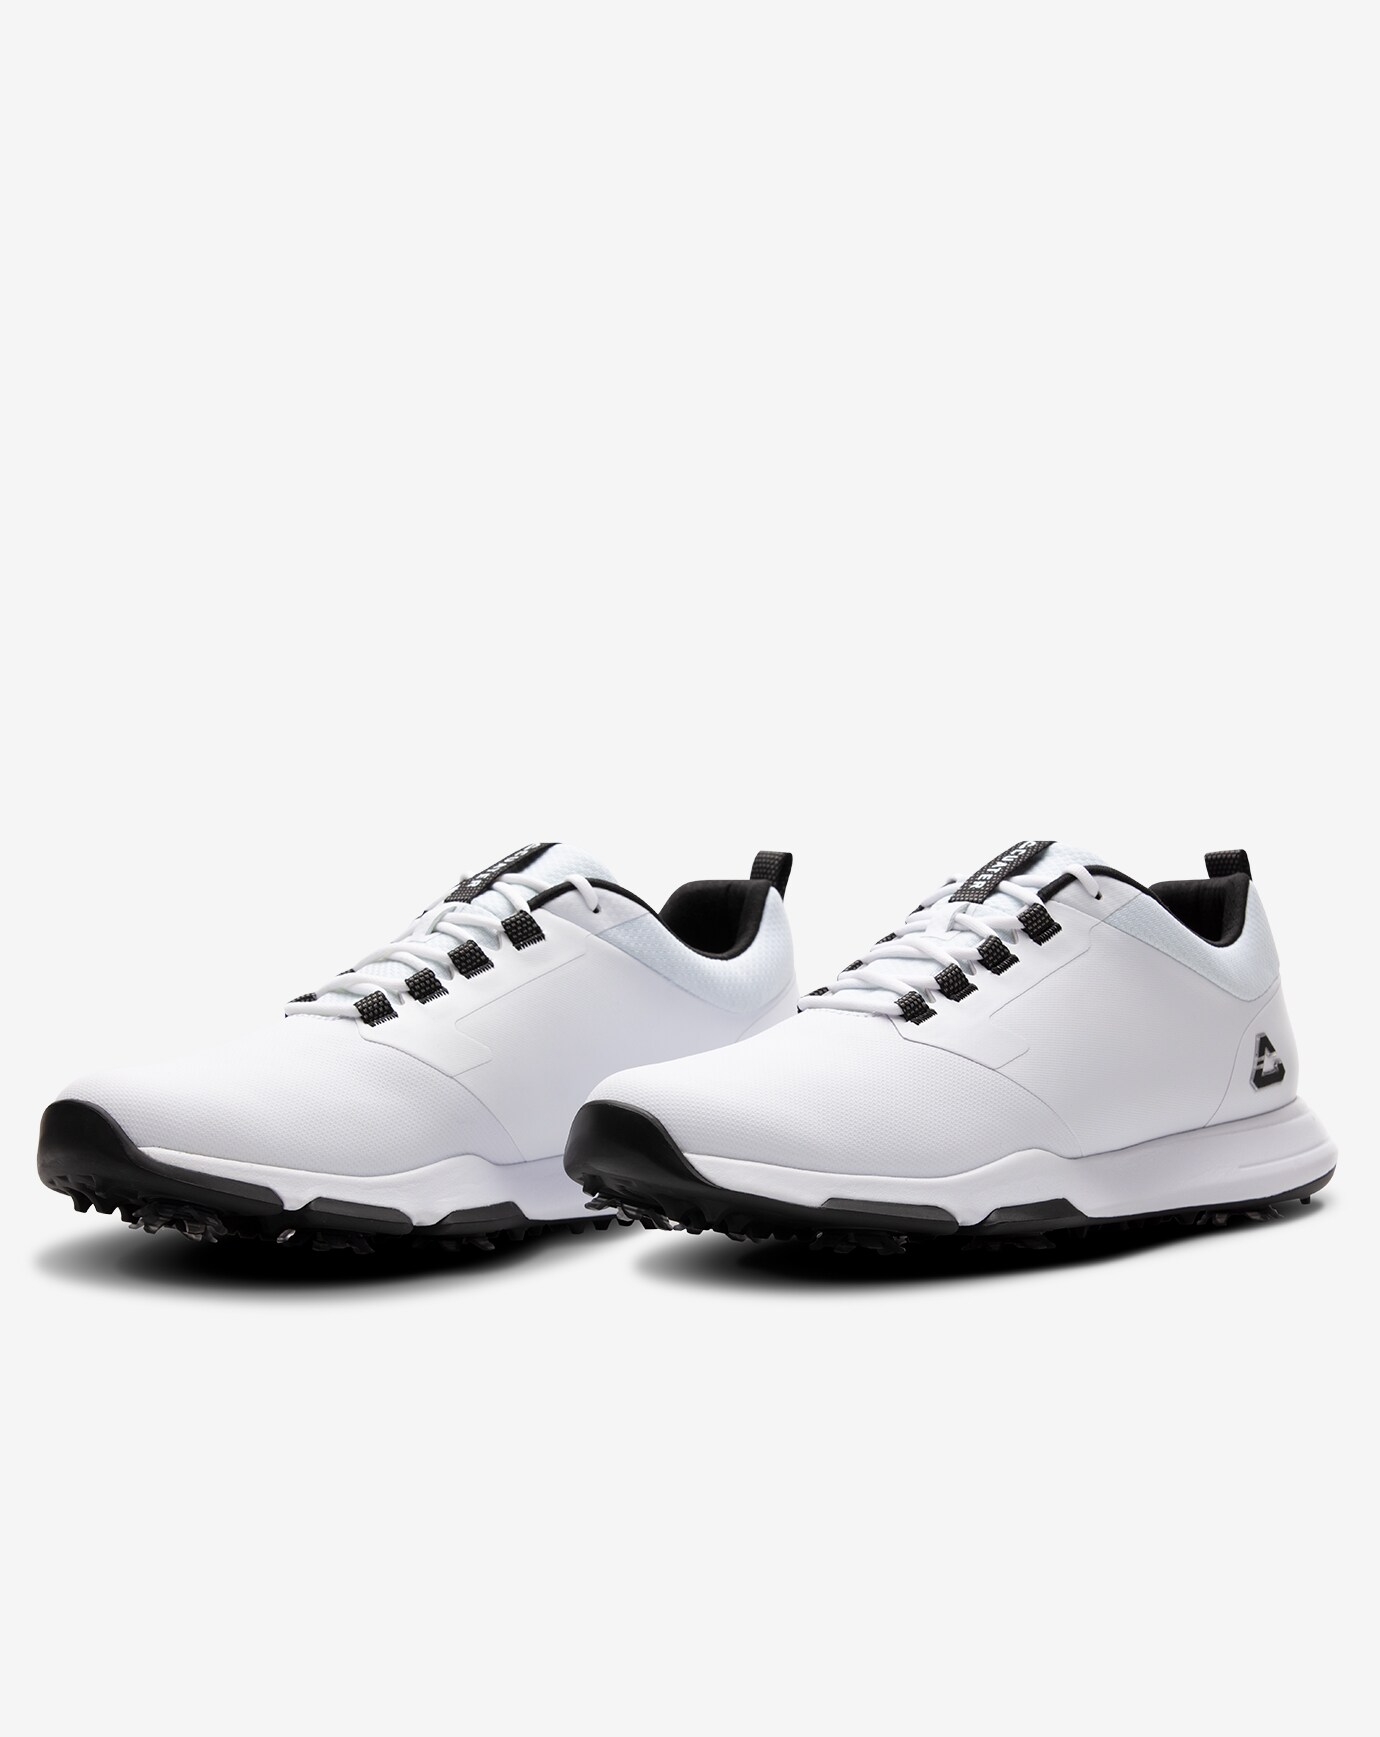 THE RINGER SPIKED GOLF SHOE Image 5